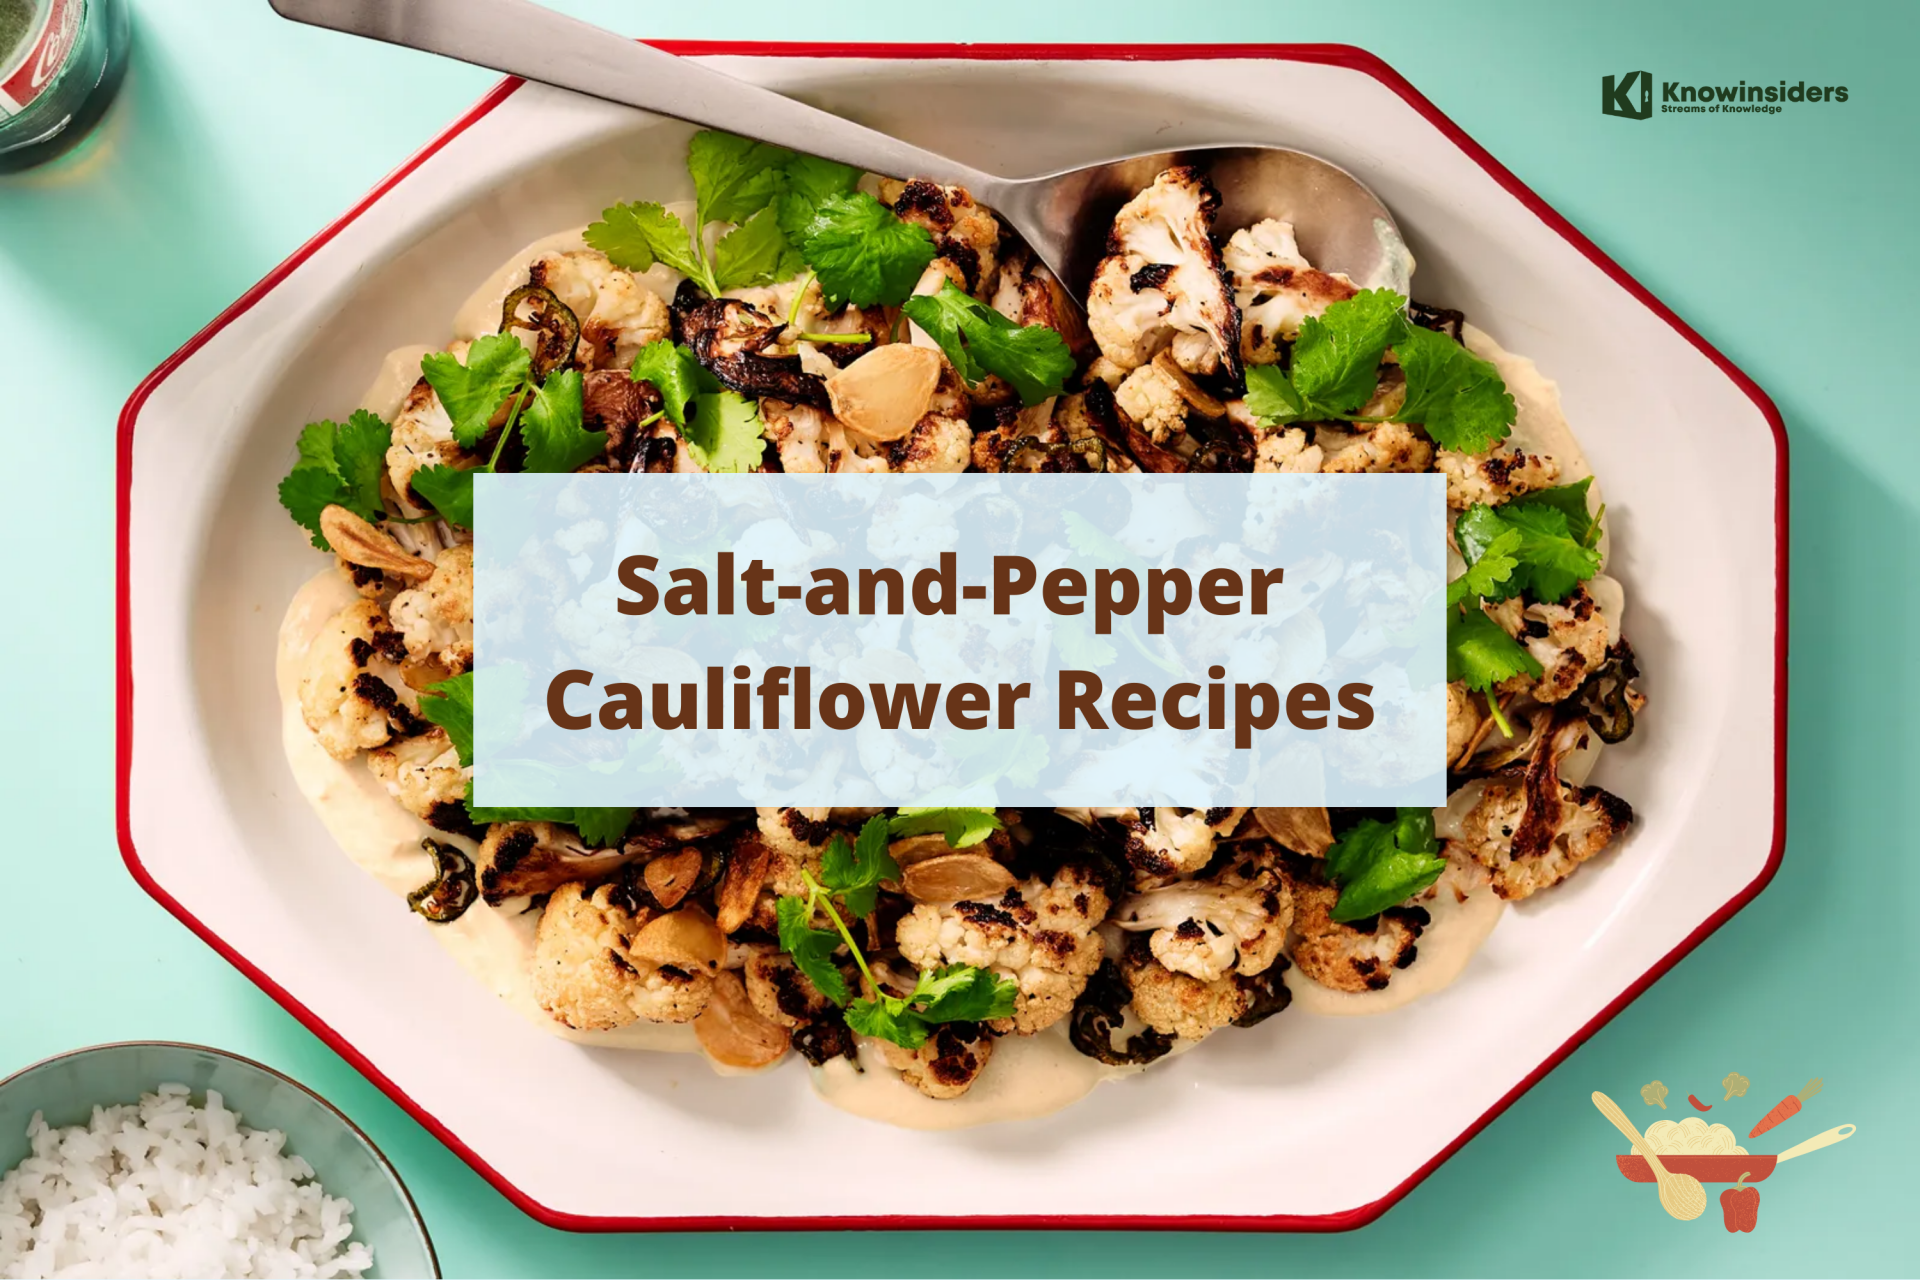 How to Make Salt-and-Pepper Cauliflower with Easy Steps